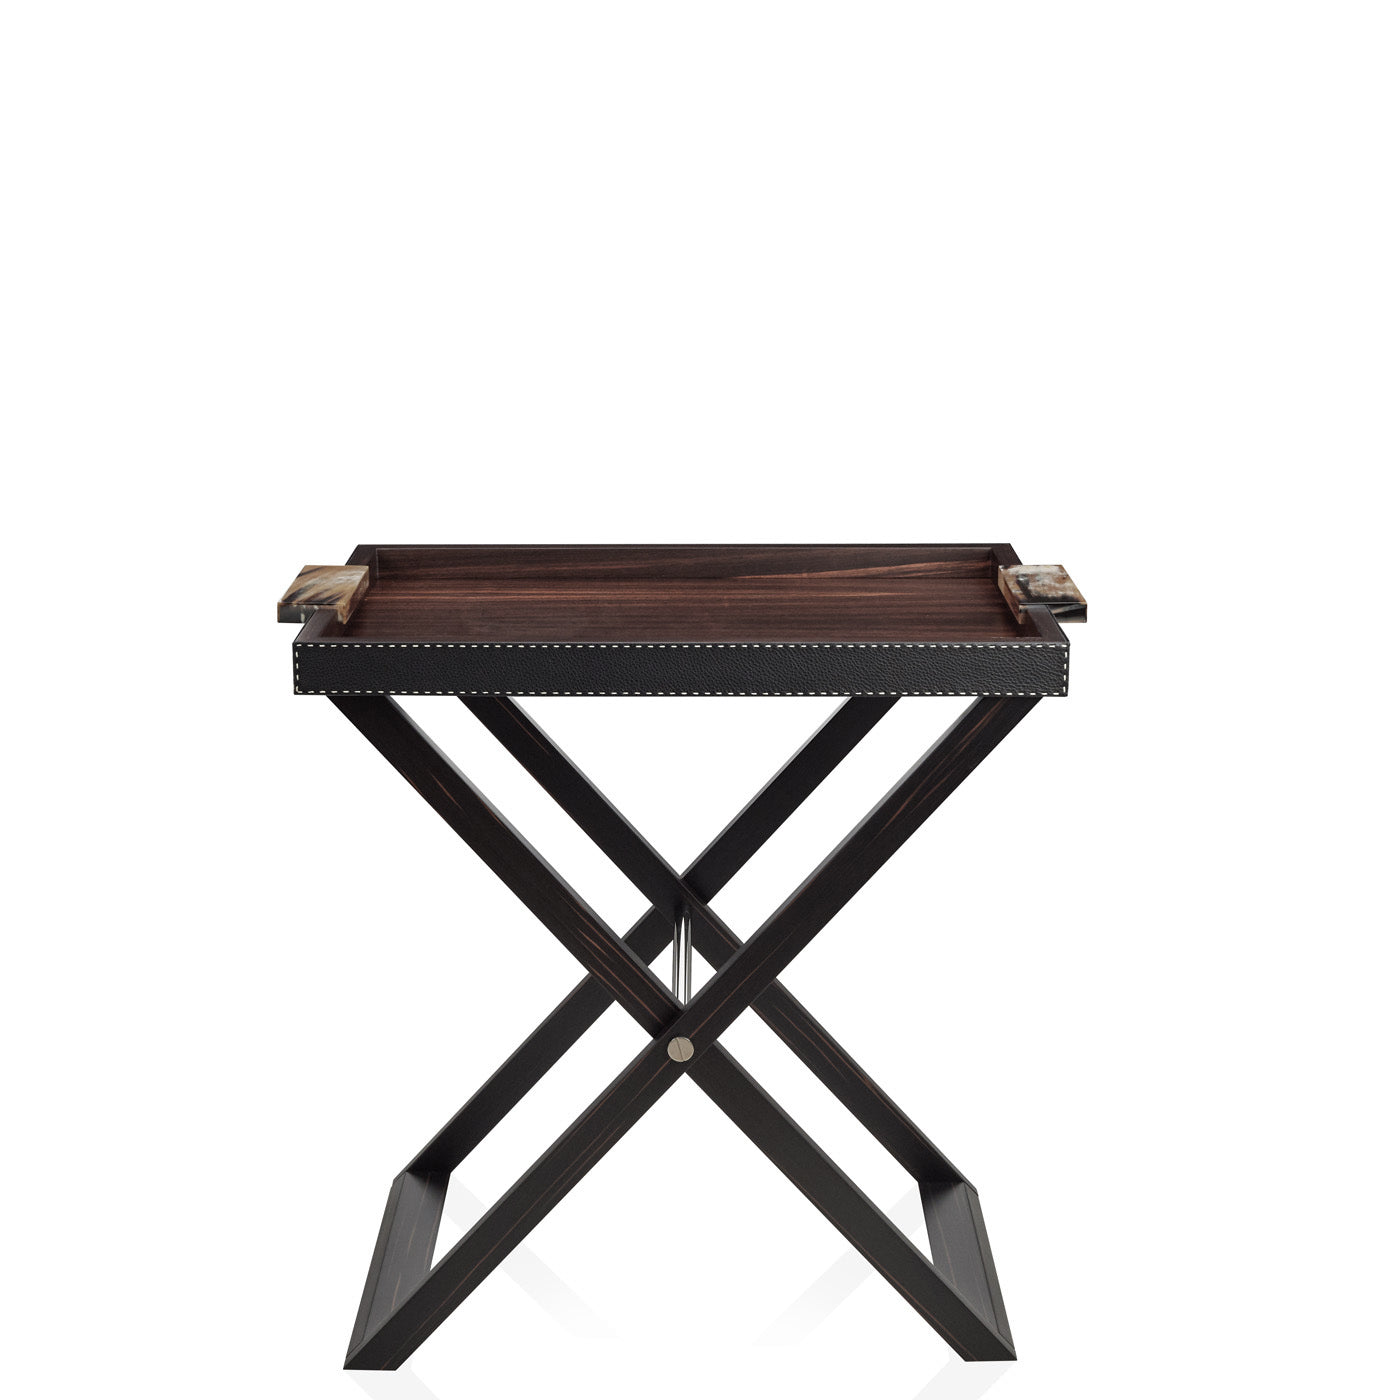 Arcahorn Lipari Butlers Serving Table | Matte Amara Ebony Veneer Tray | Aida Pebbled Leather in Onyx with Handmade Ivory Stitching | Glossy Horn Handles | Stainless Steel Detailing | Perfect for Yacht or Office Decor | Discover Luxury Home Accessories at 2Jour Concierge, #1 luxury high-end gift & lifestyle shop